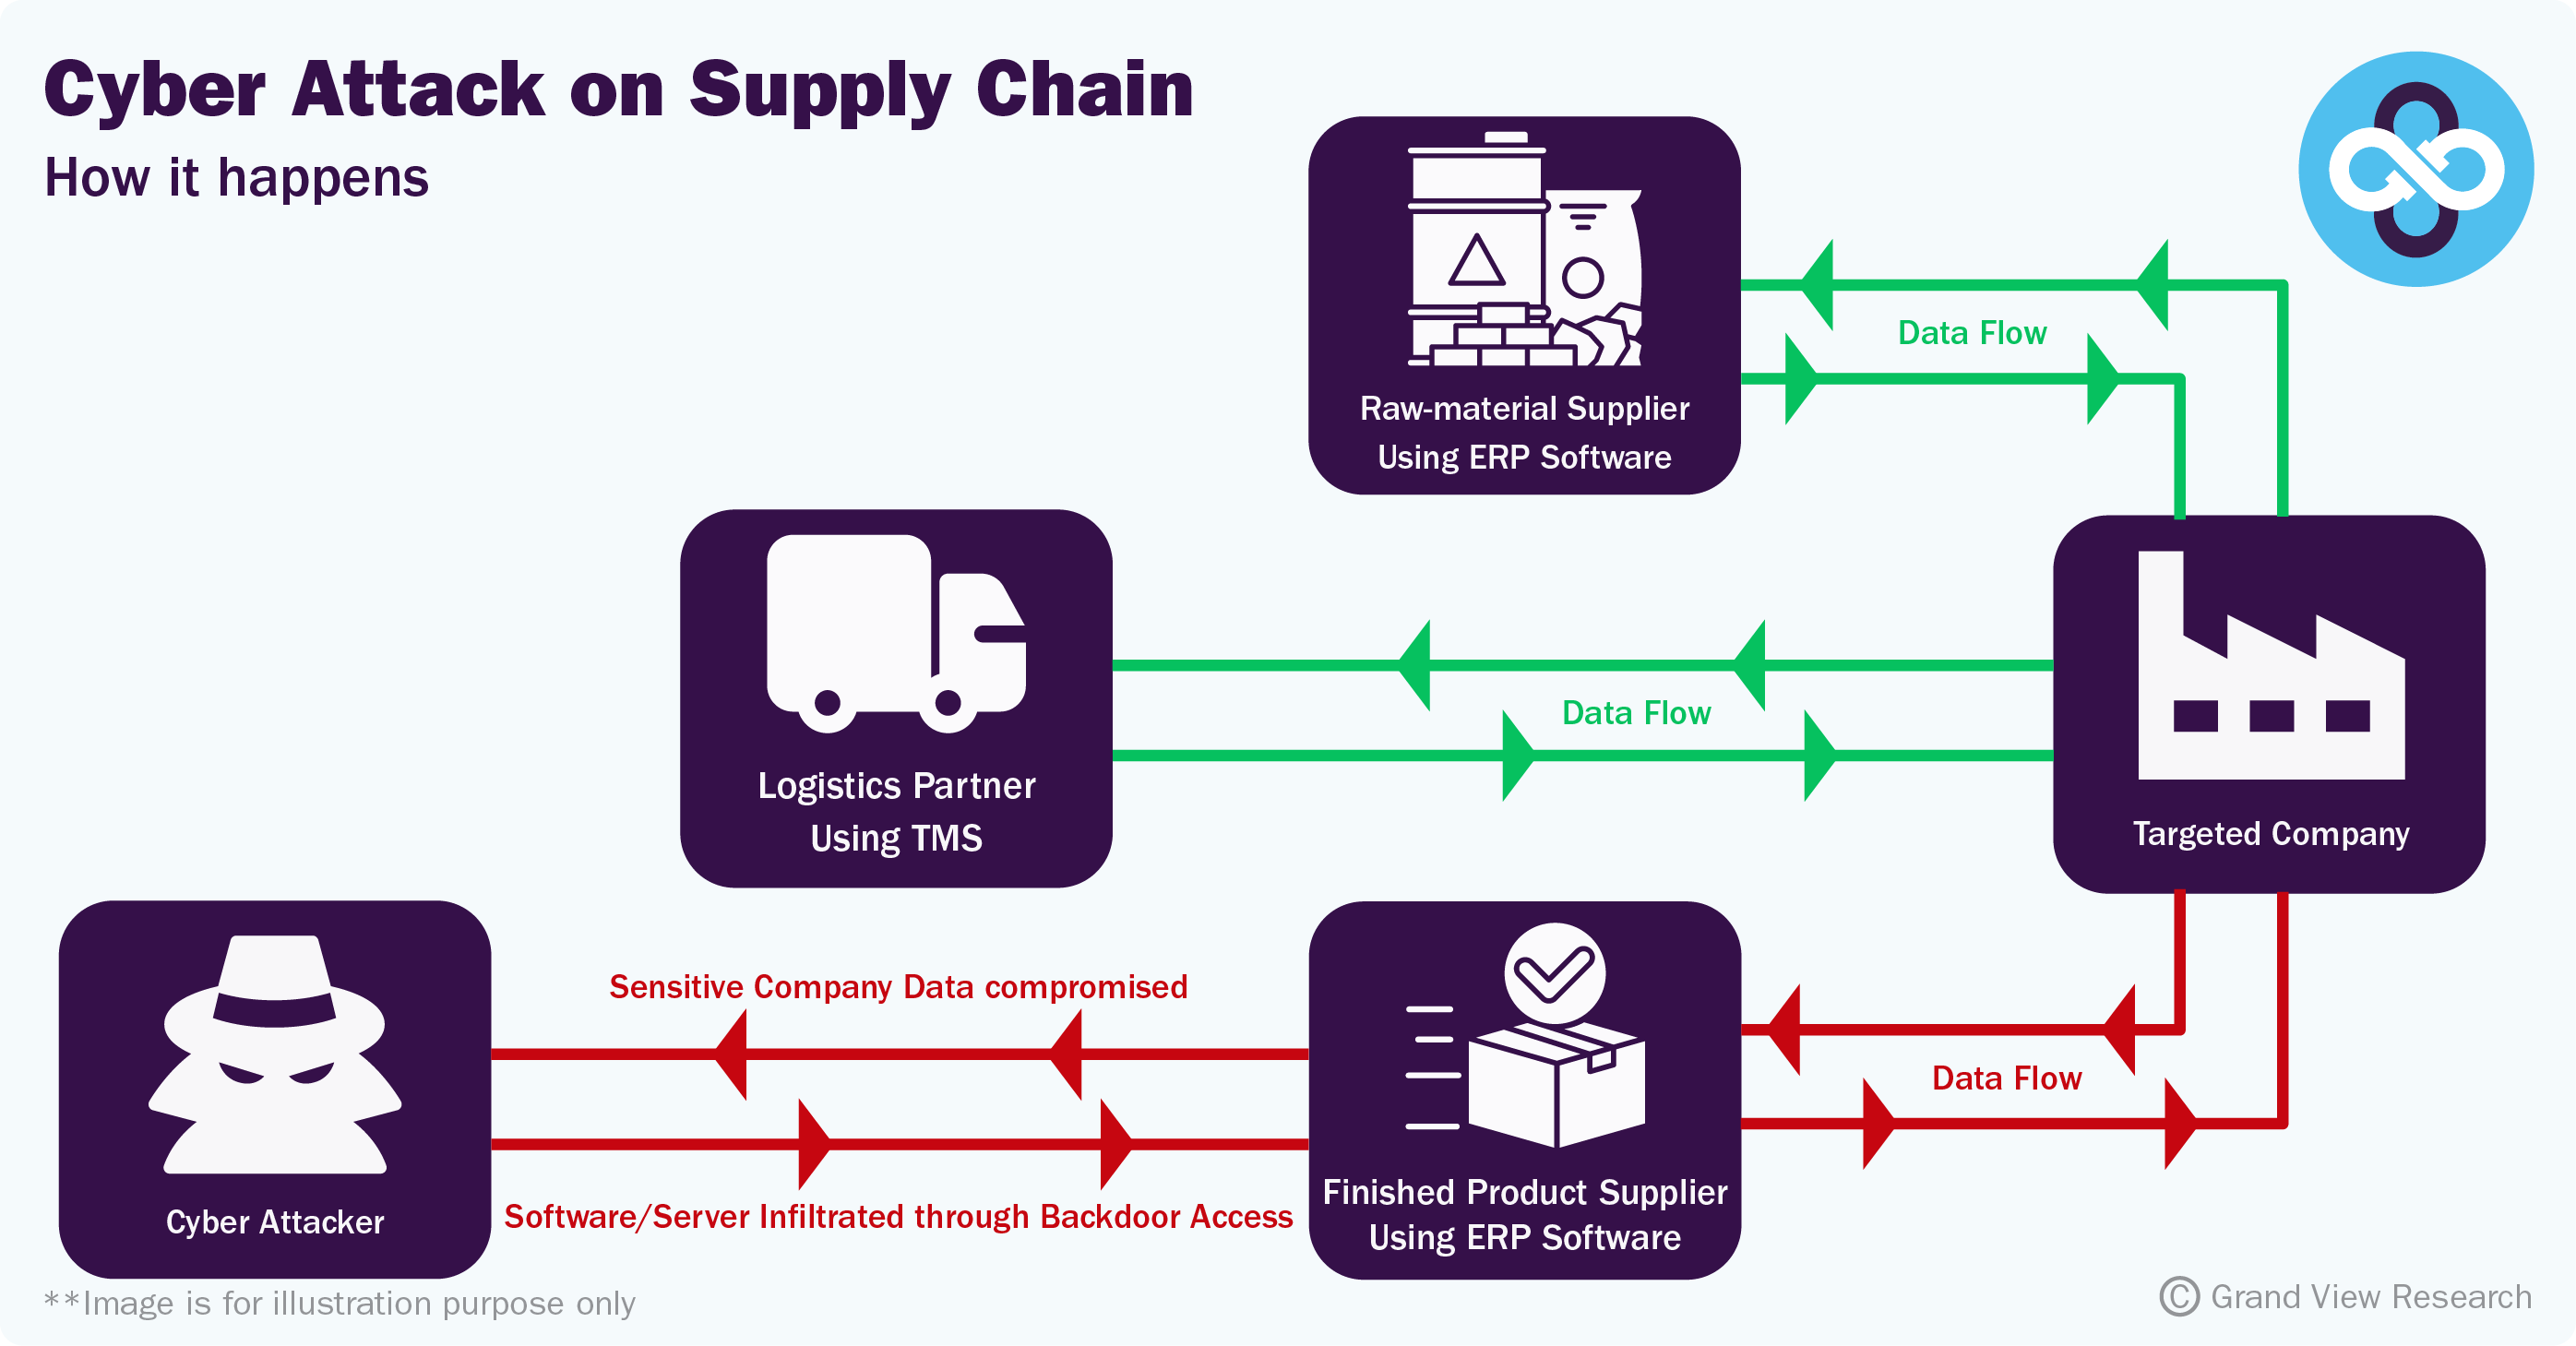 Cyber Attack on Supply Chain - How it happens